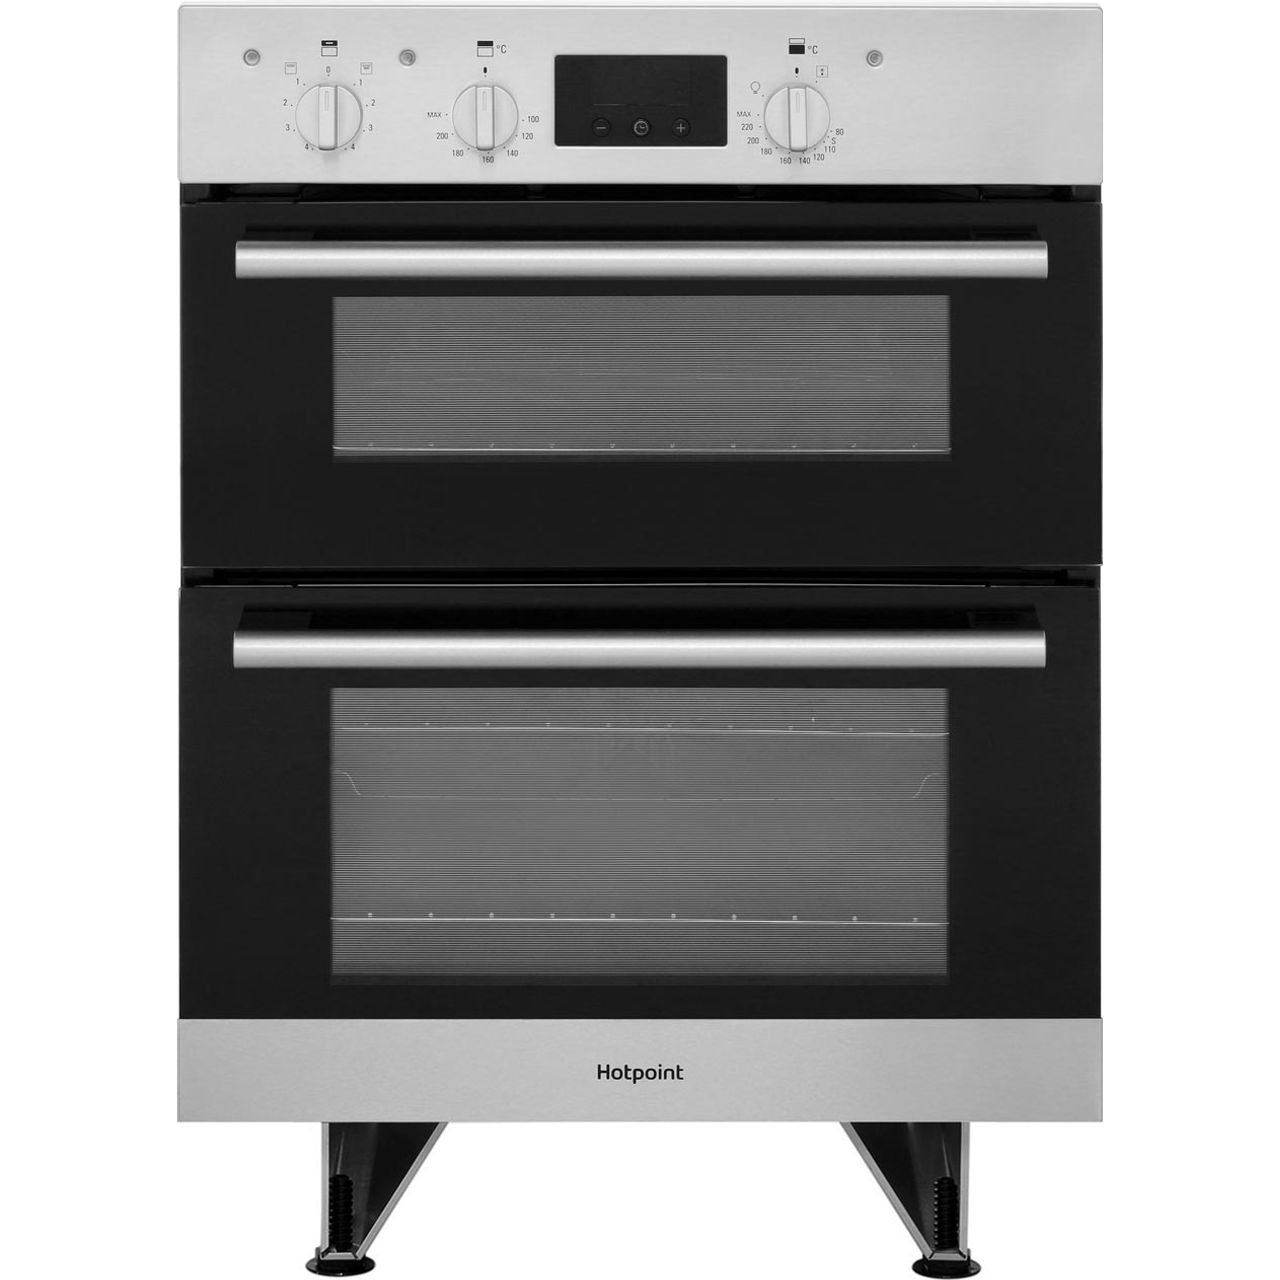 Hotpoint Class 2 DU2540IX Built Under Double Oven in Stainless Steel